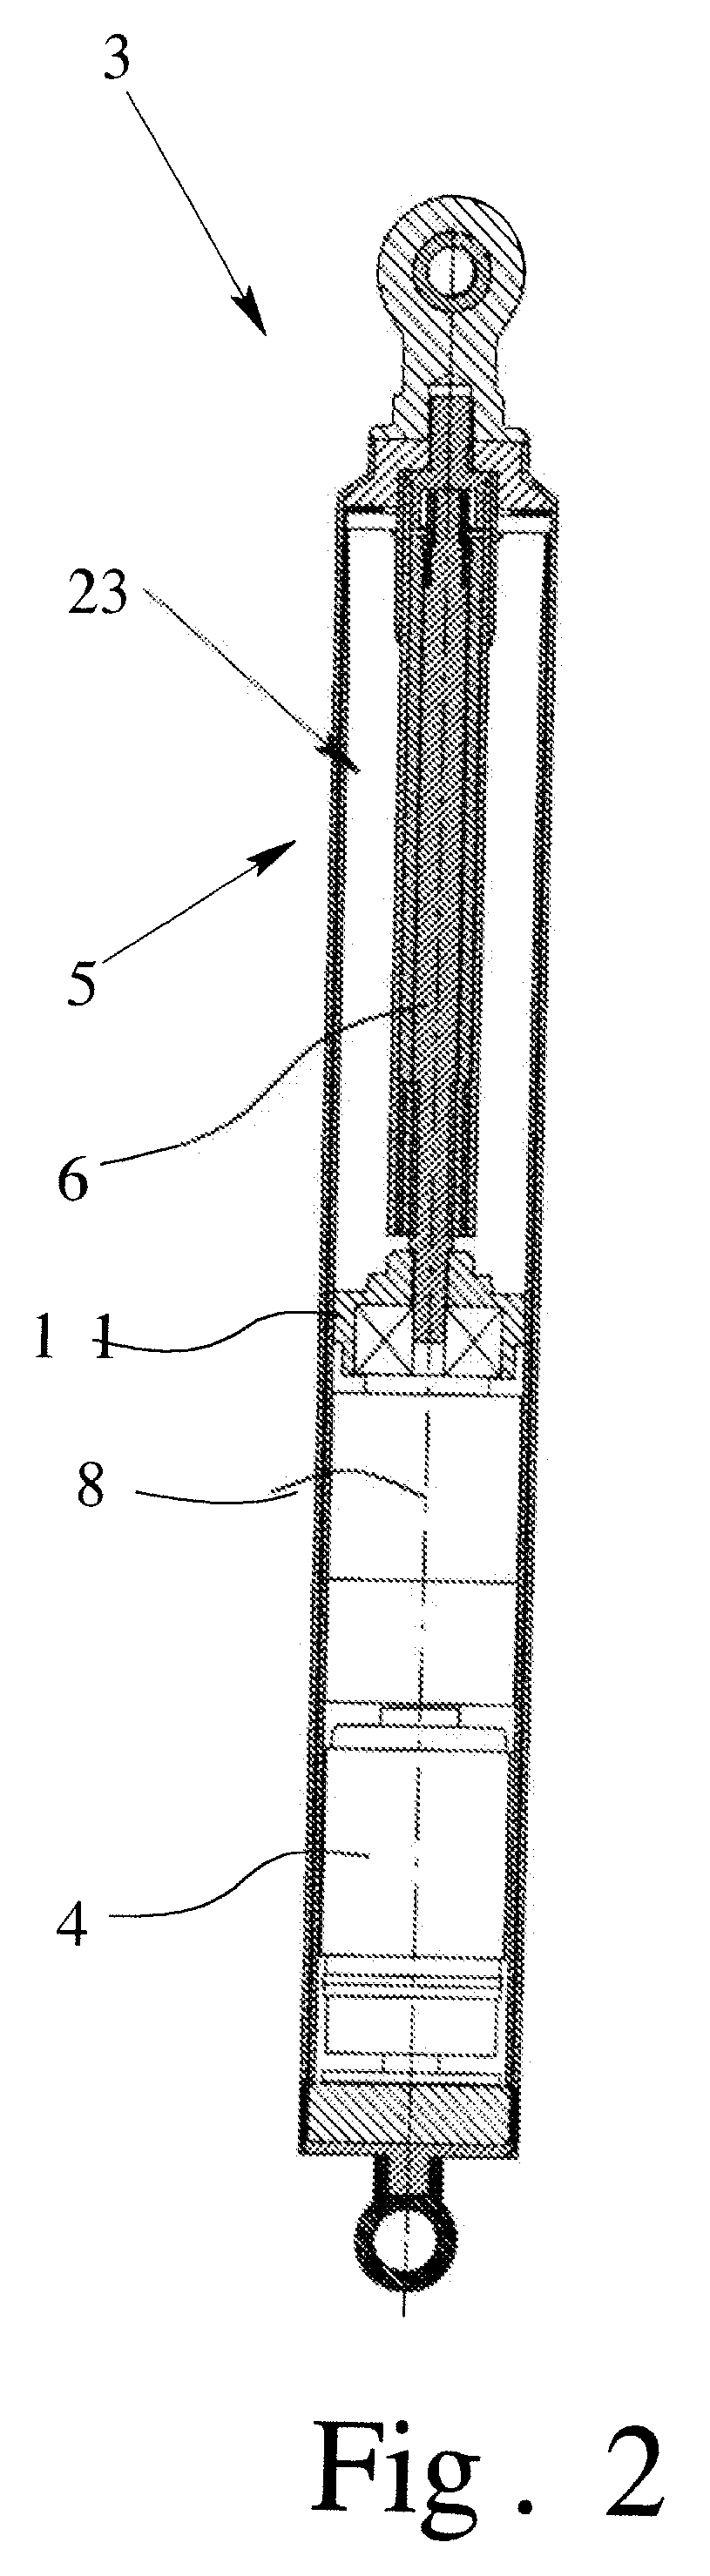 Drive arrangement for motorized actuation of a functional element in a motor vehicle